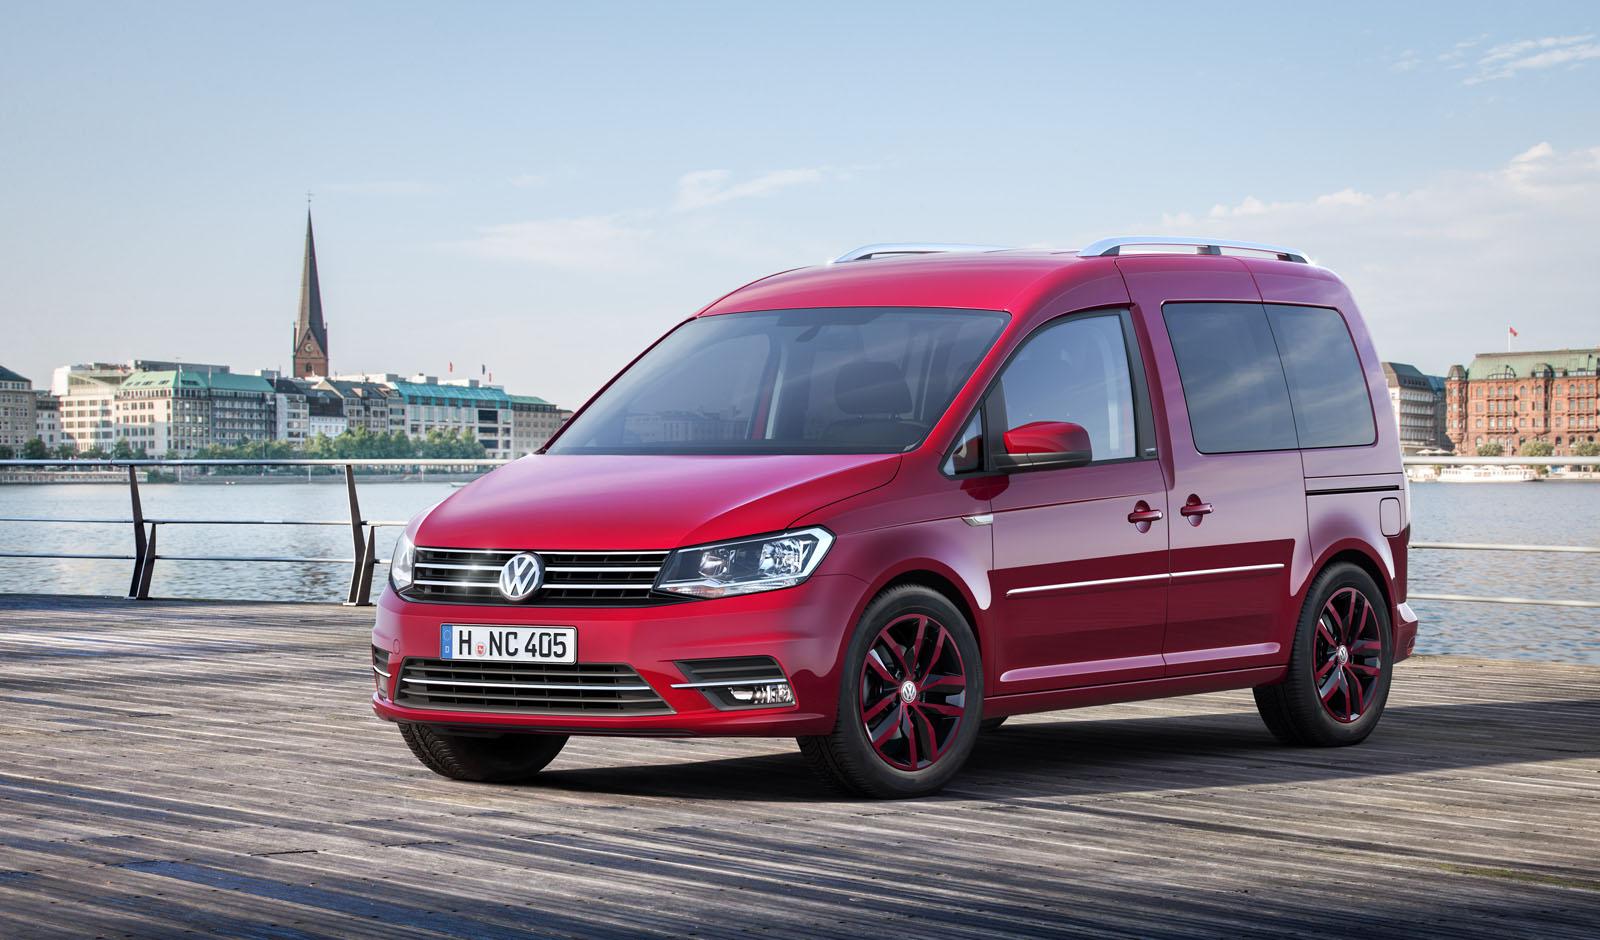 2015 Volkswagen Caddy Unveiled with New 1.0 TSI 3Cylinder Turbo Engine